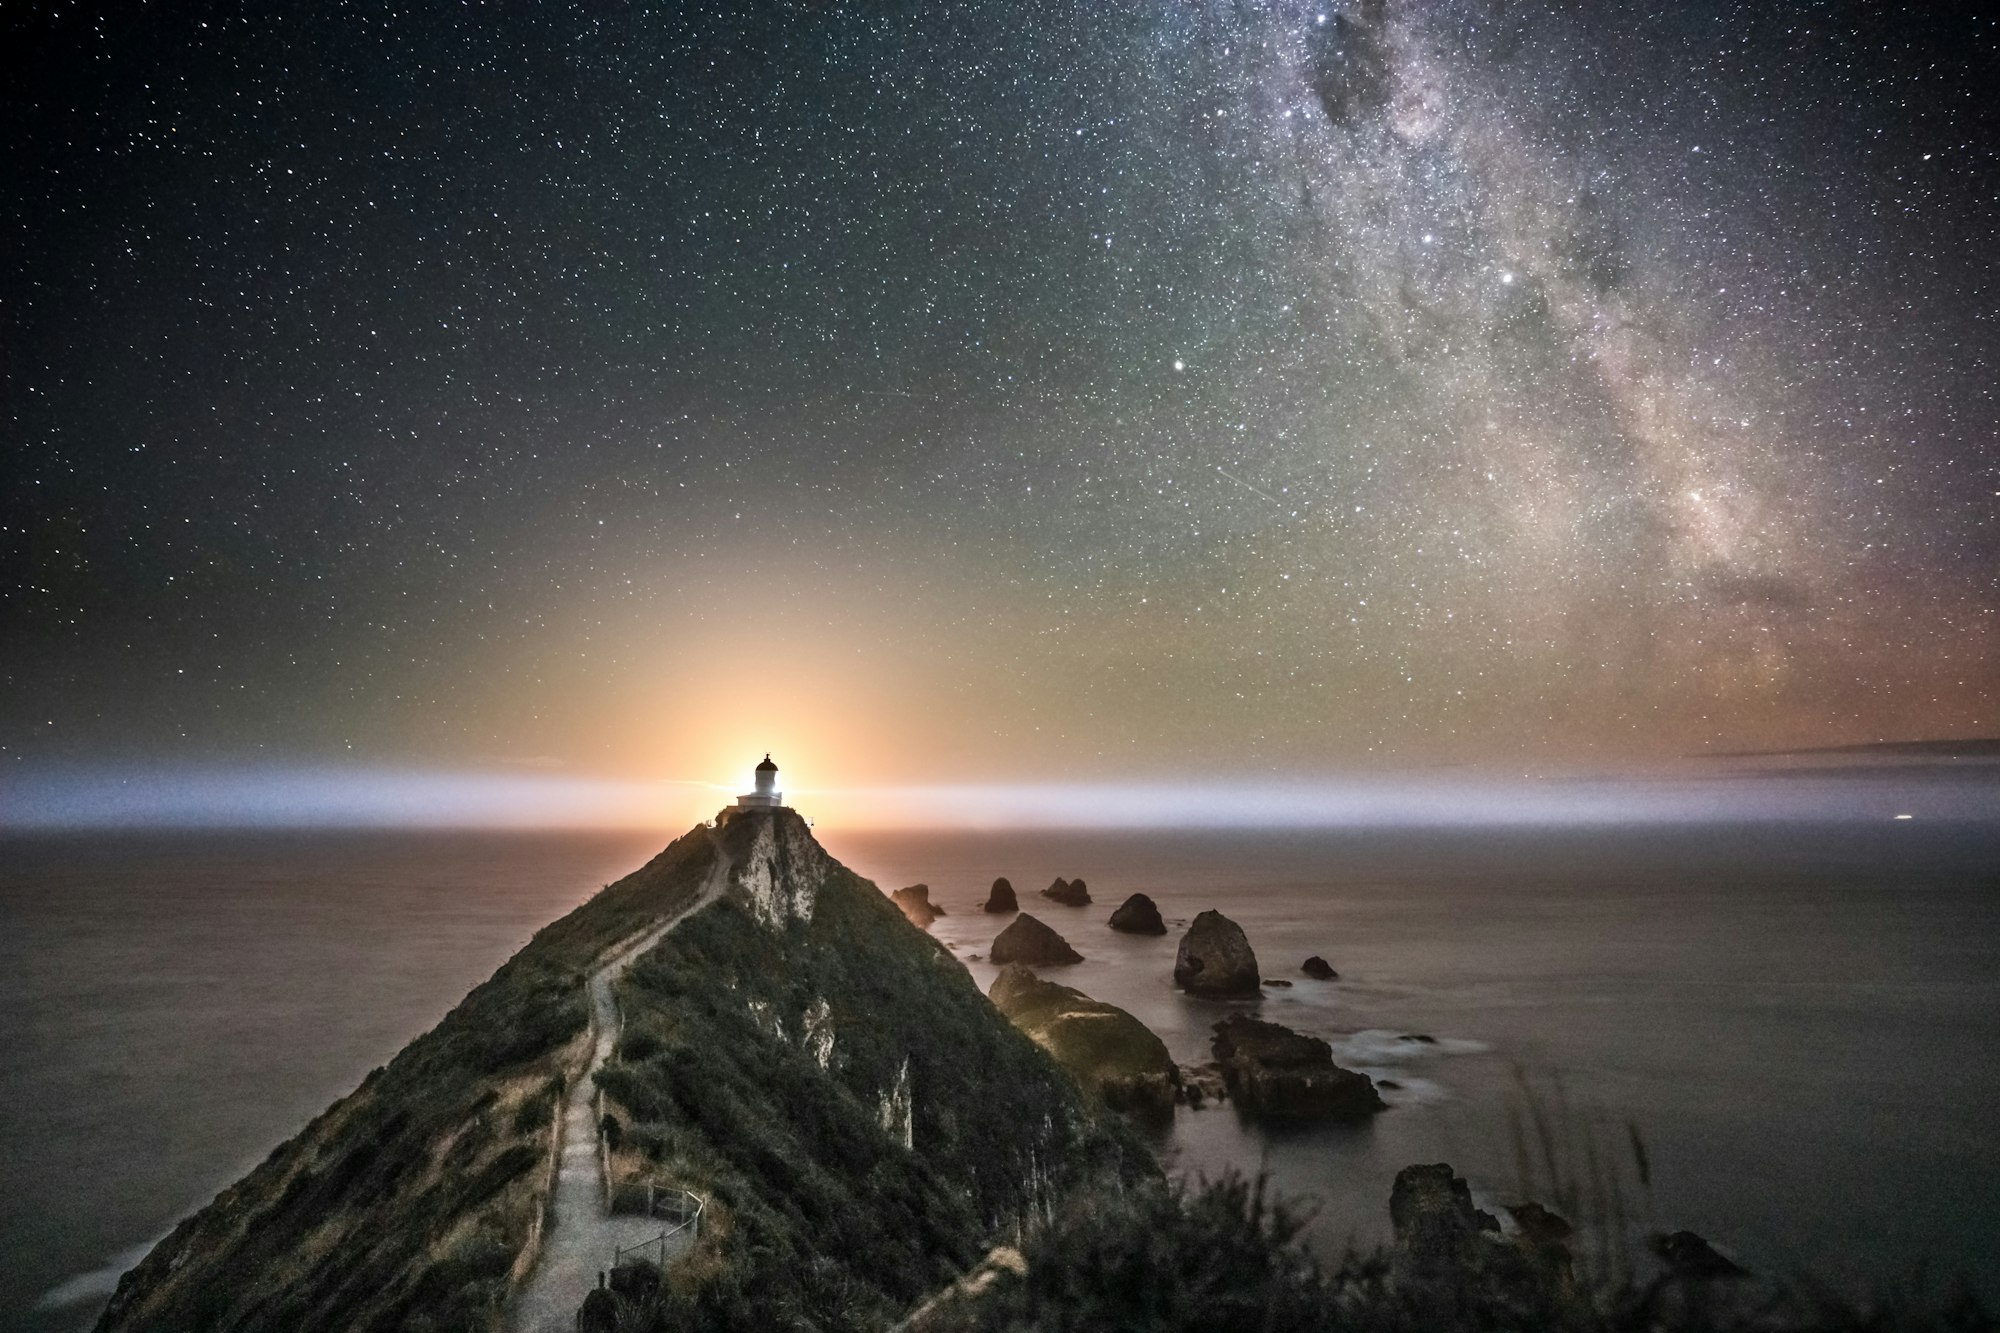 Nugget Point, New Zealand. A lovely image of a fantastic place with a perfect setting. One can see parts of the Milky Way and the moon rising perfectly aligned behind the lighthouse.